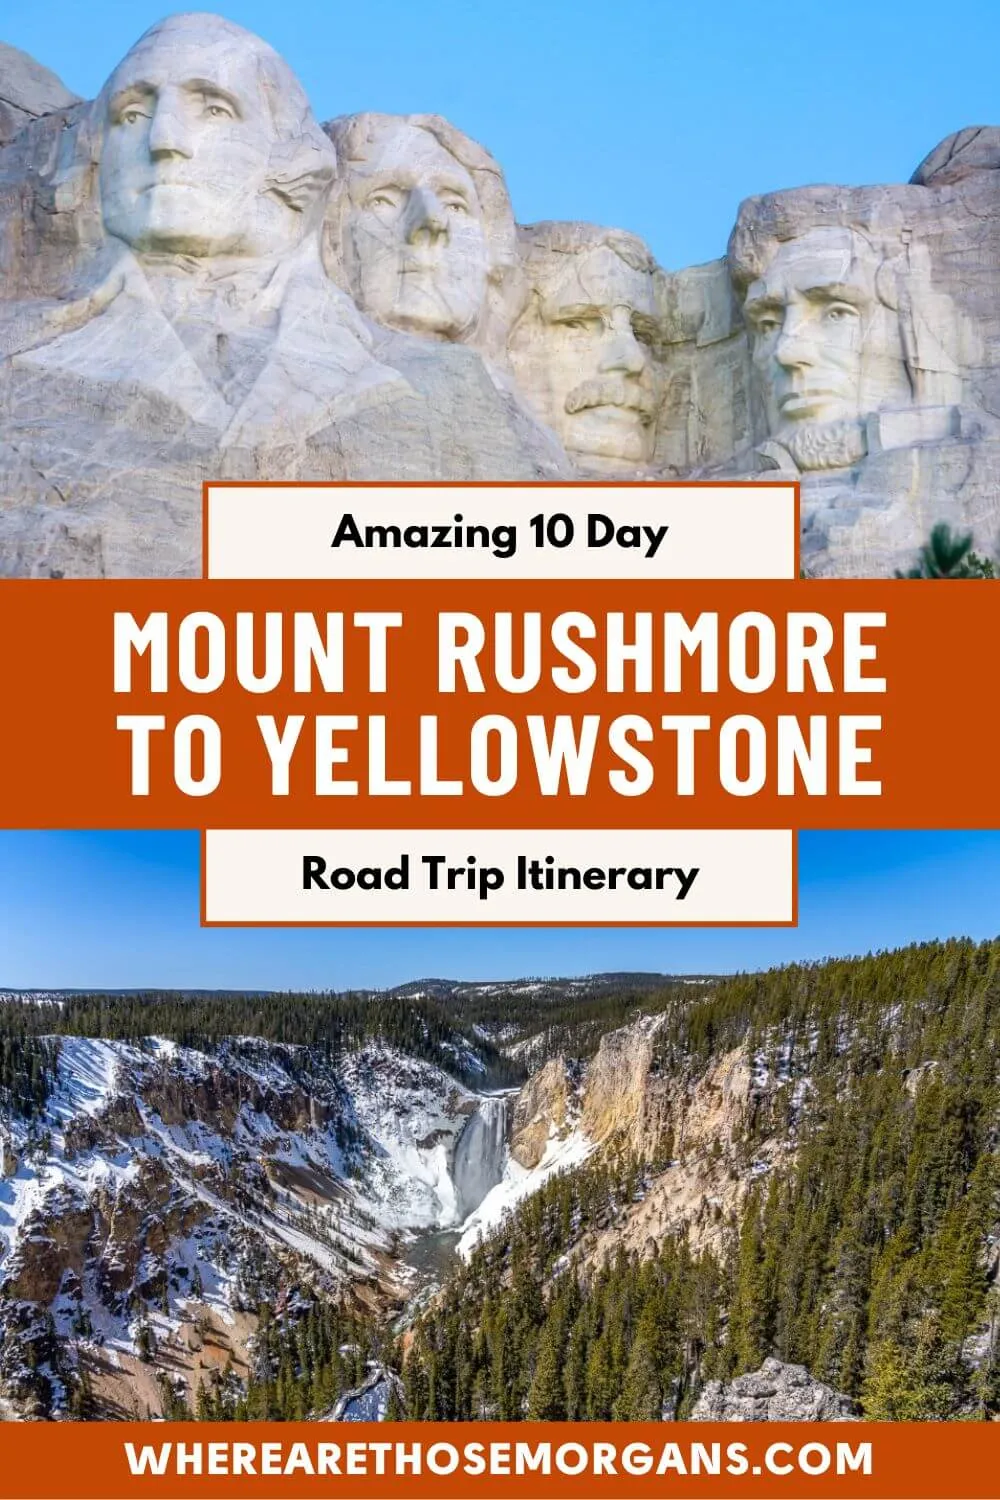 road trip from indianapolis to yellowstone